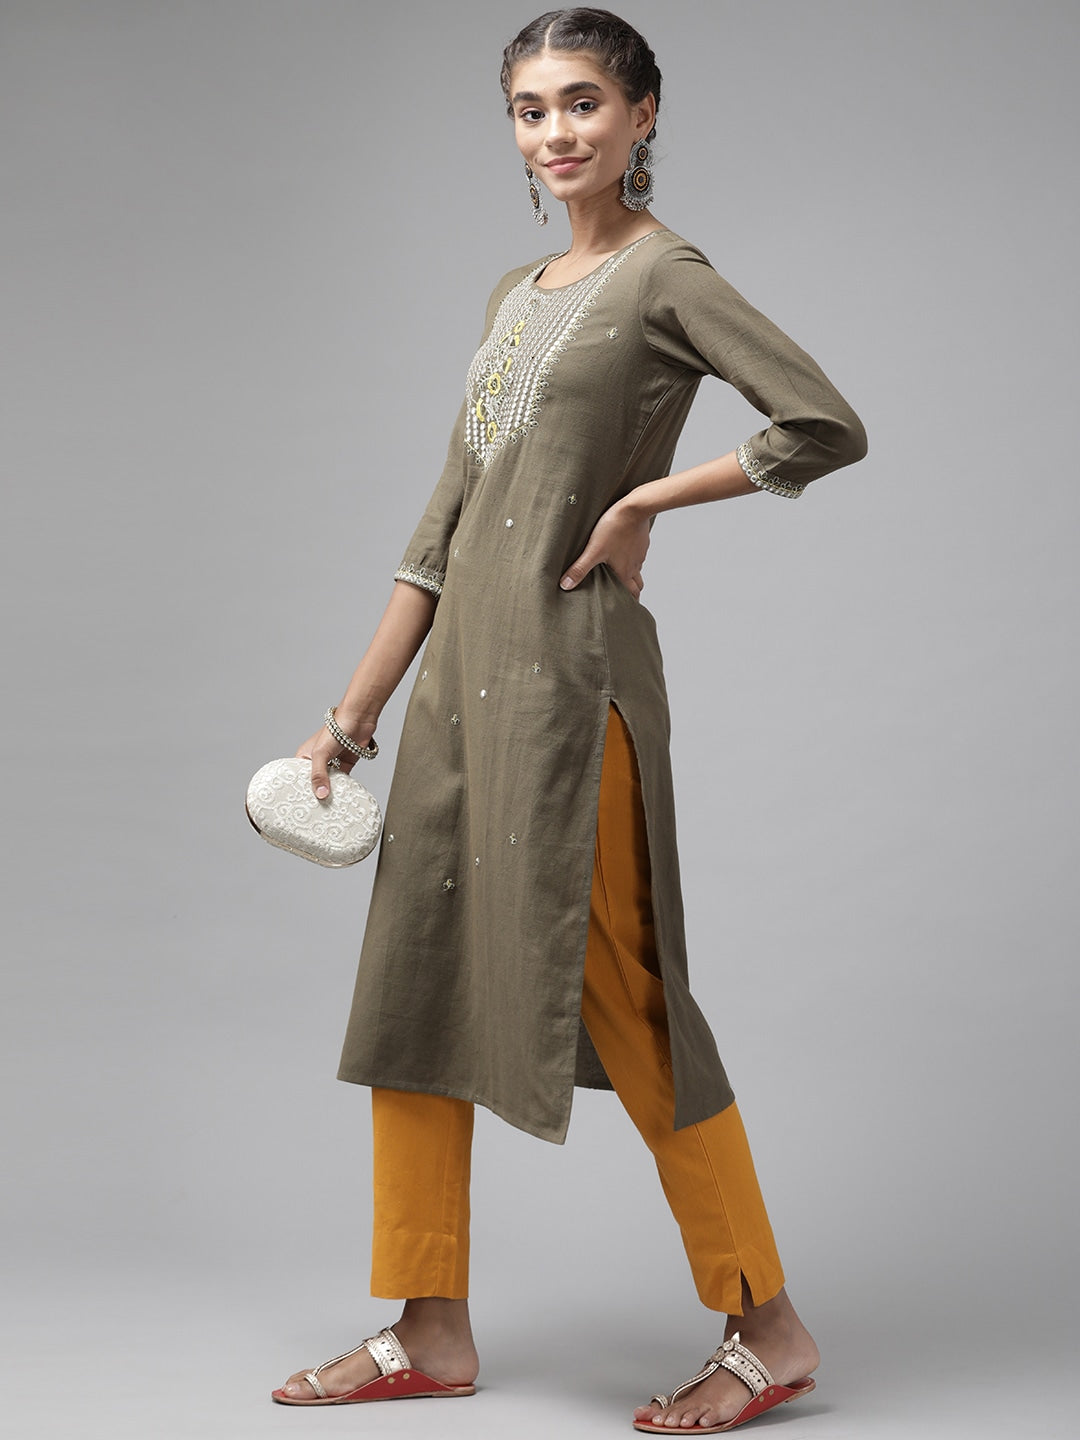 Yellow Cotton Fit Trousers Yufta Store